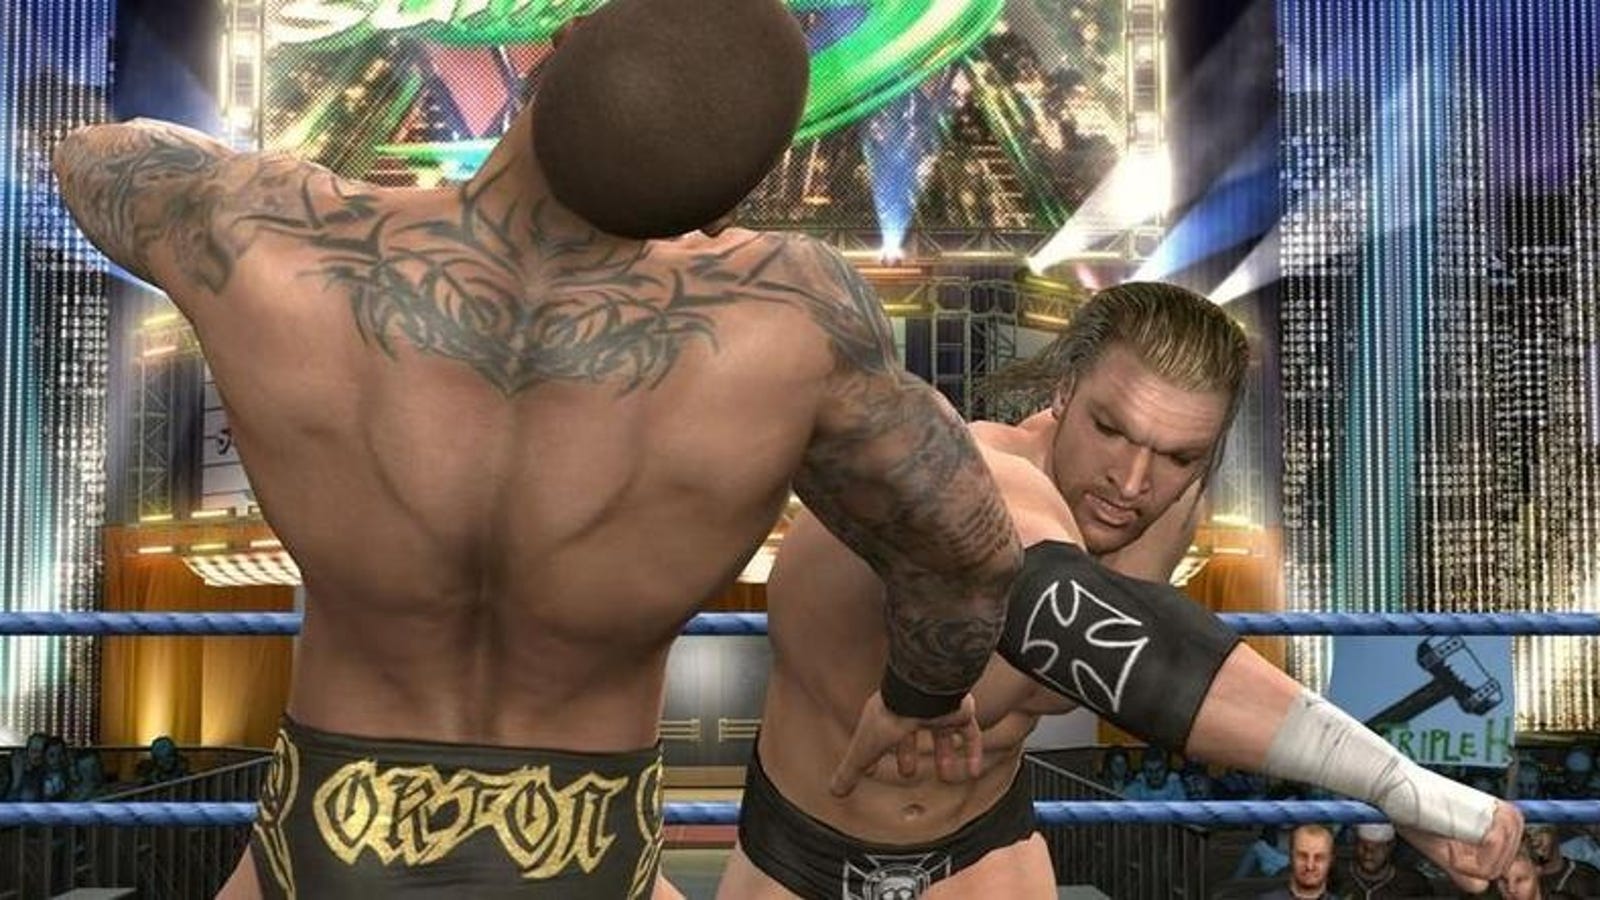 Image result for wwe smack down pain pc game HD images